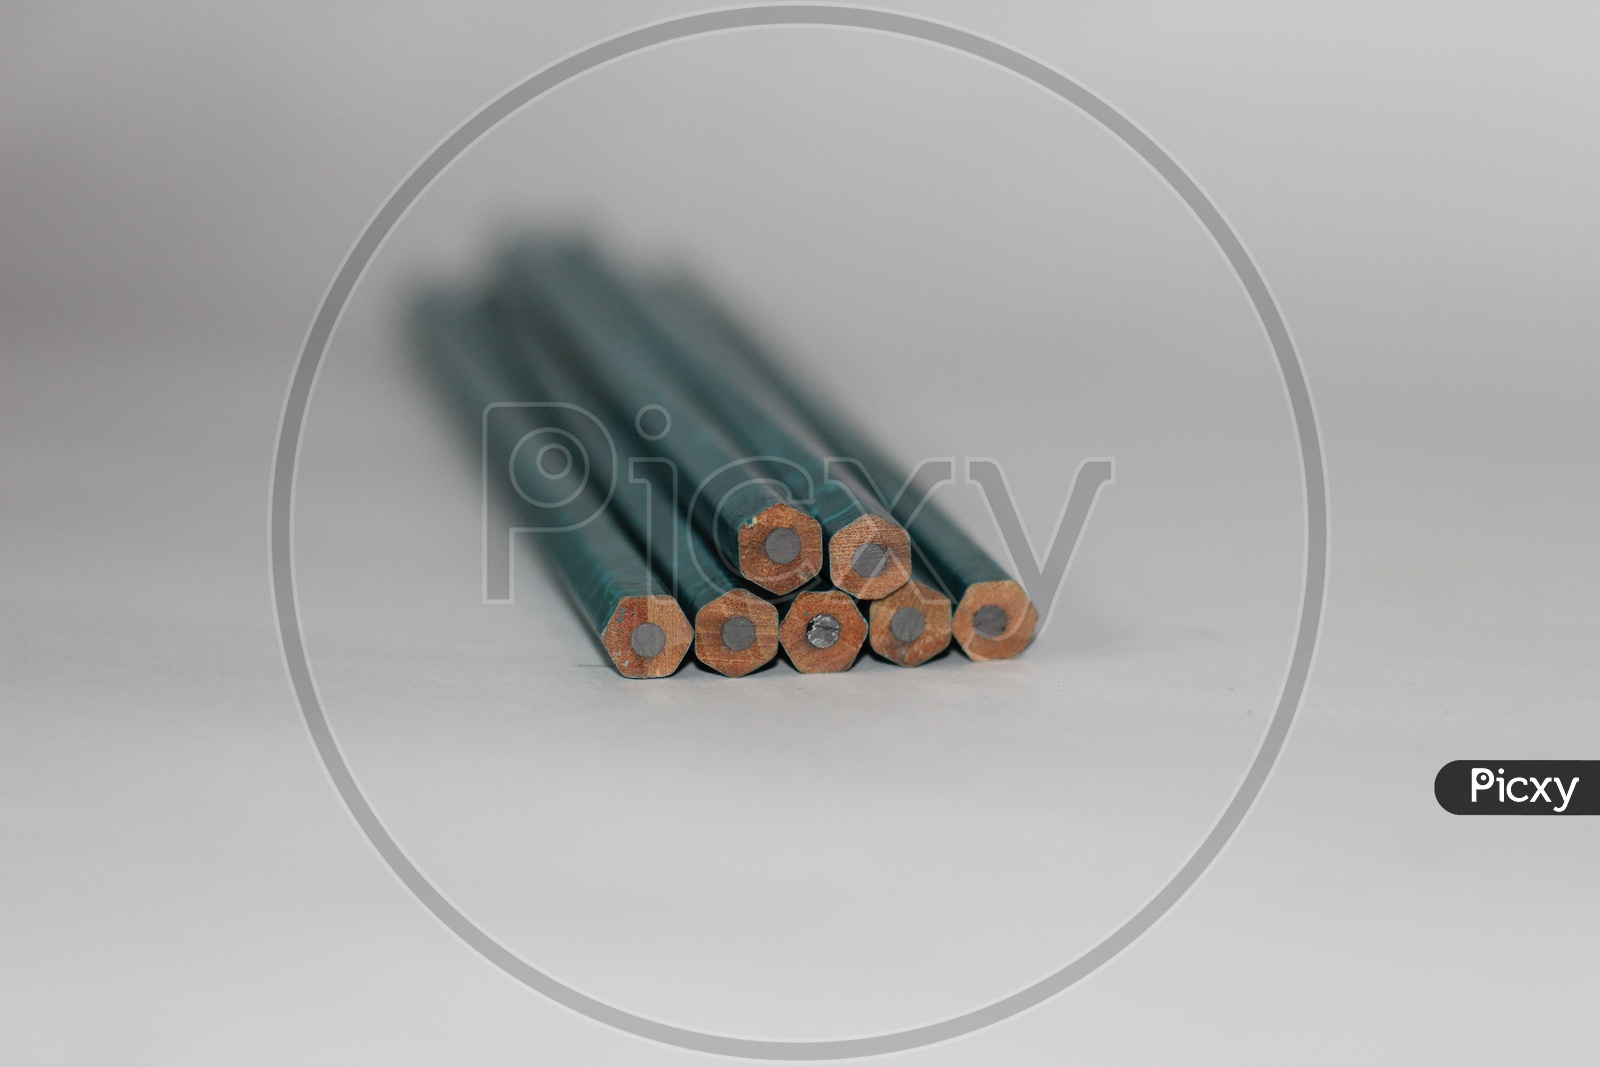 Led Pencils Bunch With Selective Focus On isolated White